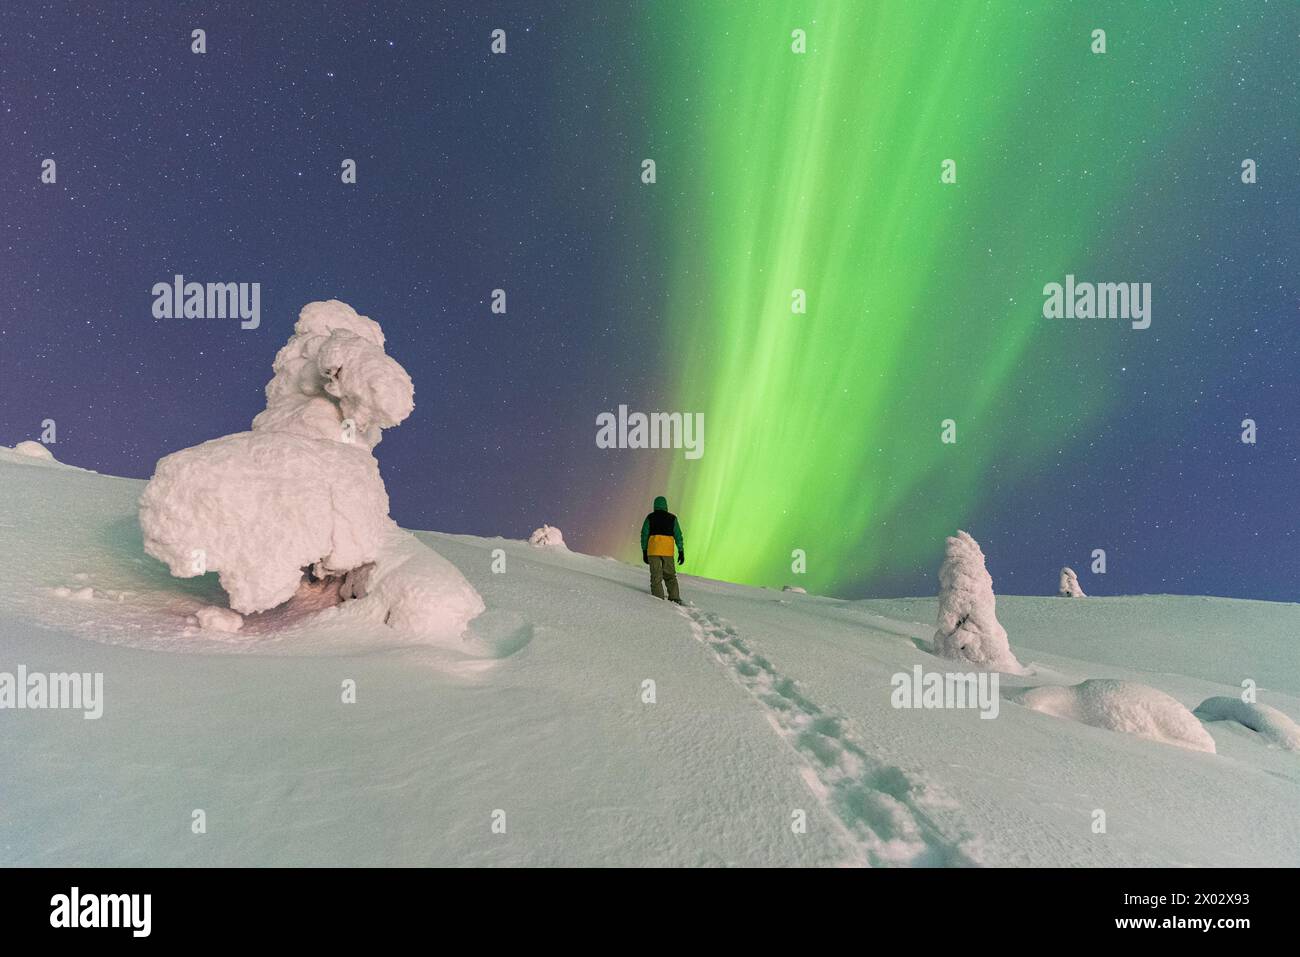 Night view of a man climbing a hill with trees covered with snow and ice, admiring the green of the Northern Lights (Aurora Borealis) Stock Photo